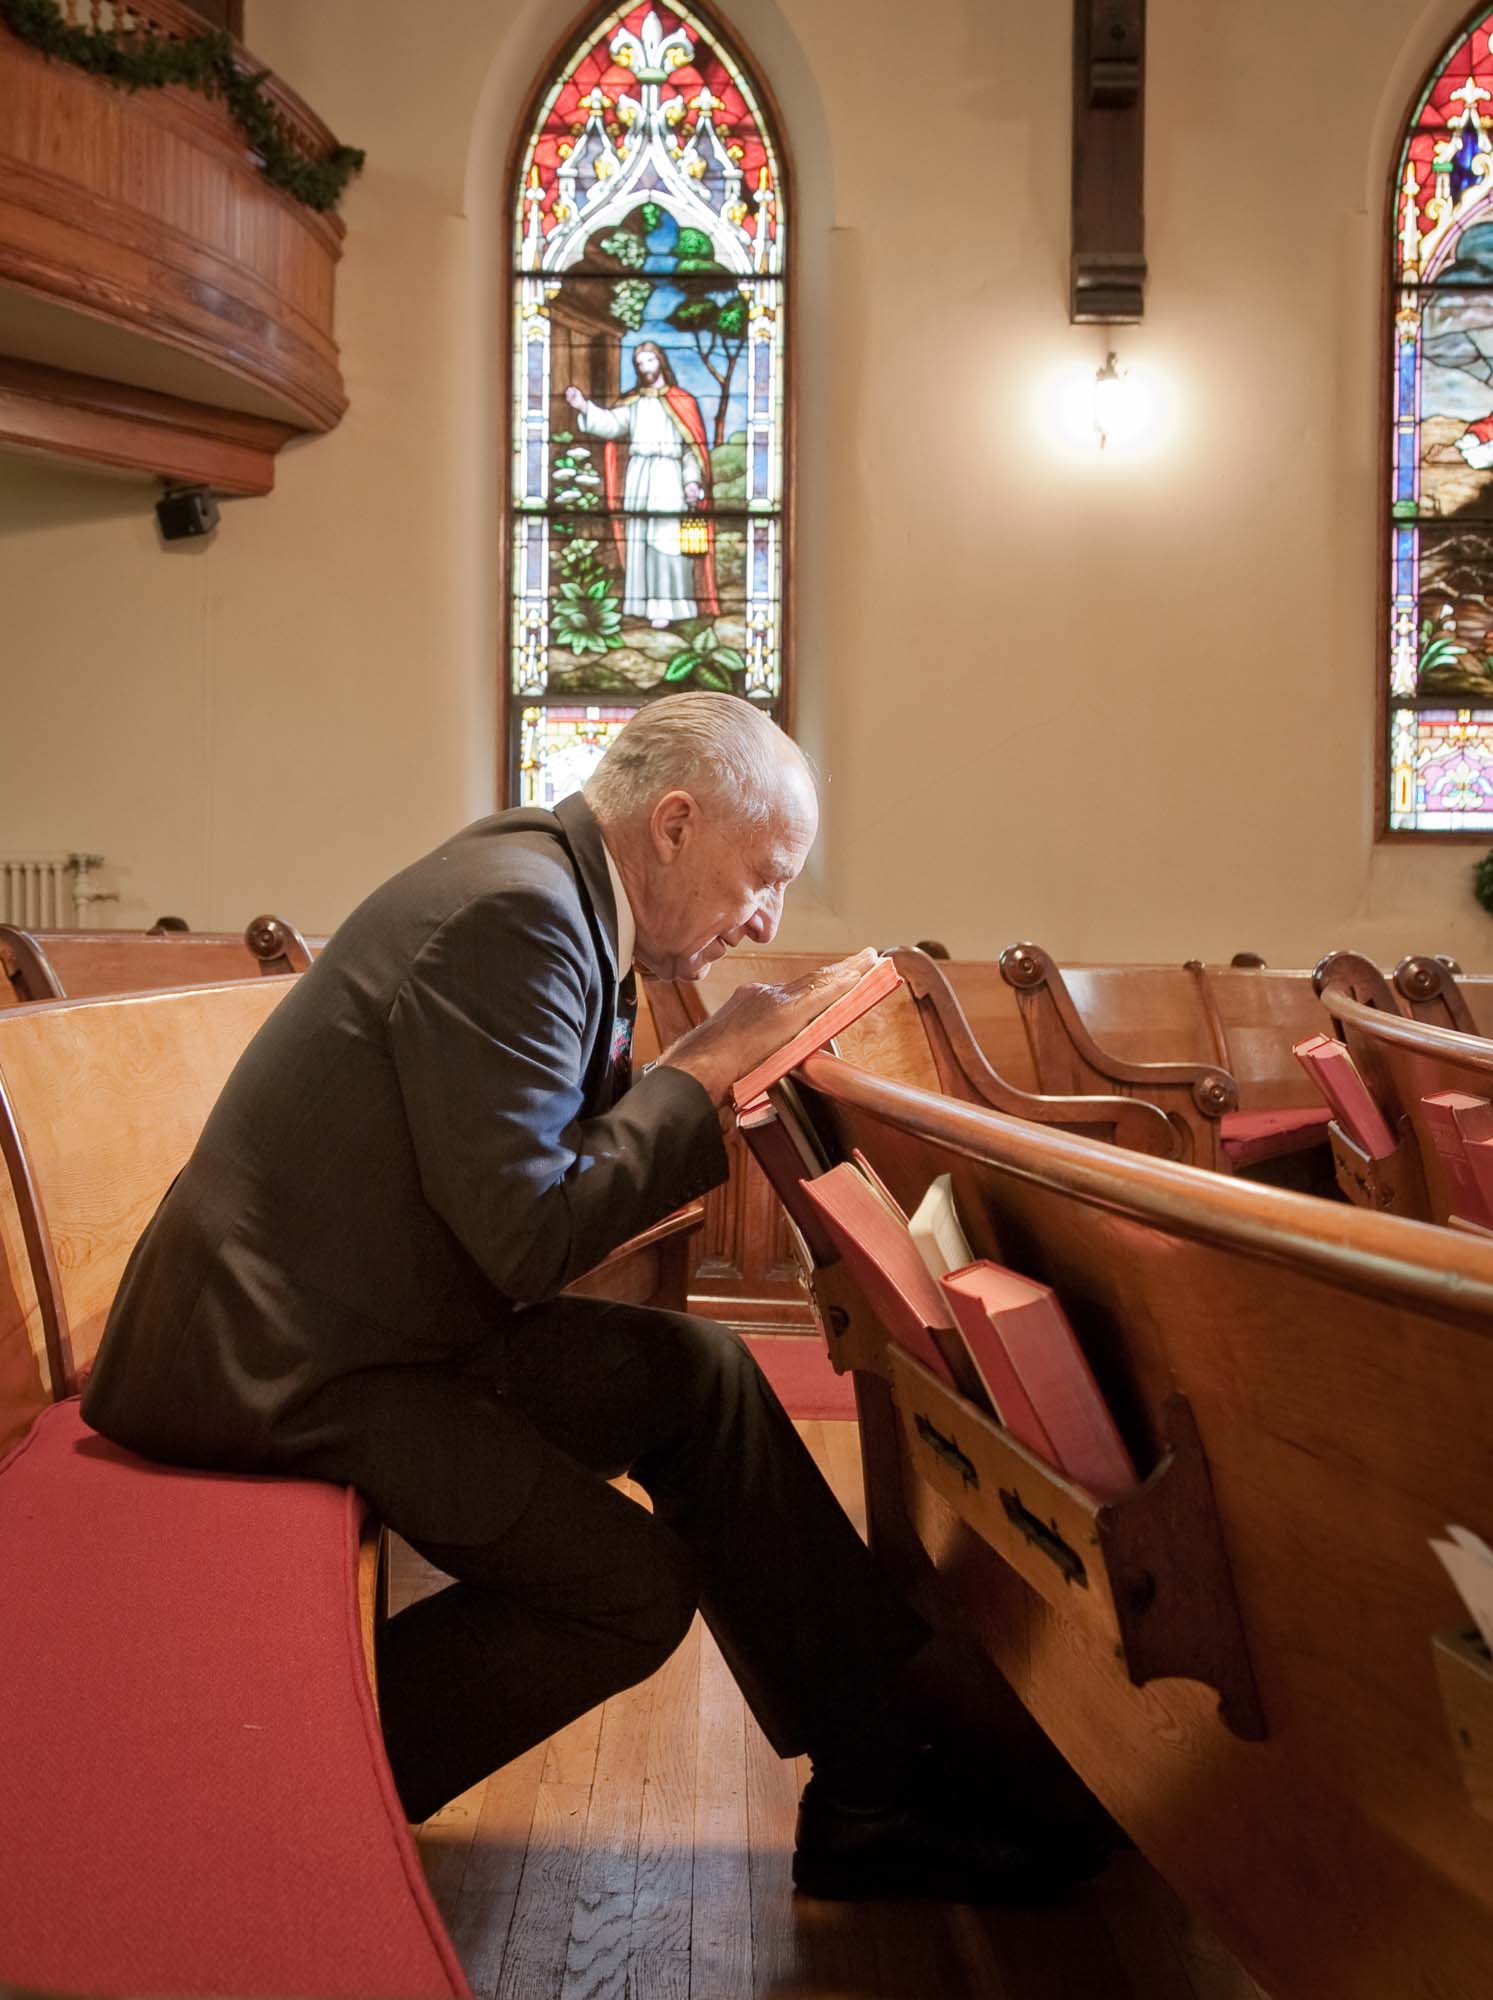 Active retired citizen praying to God